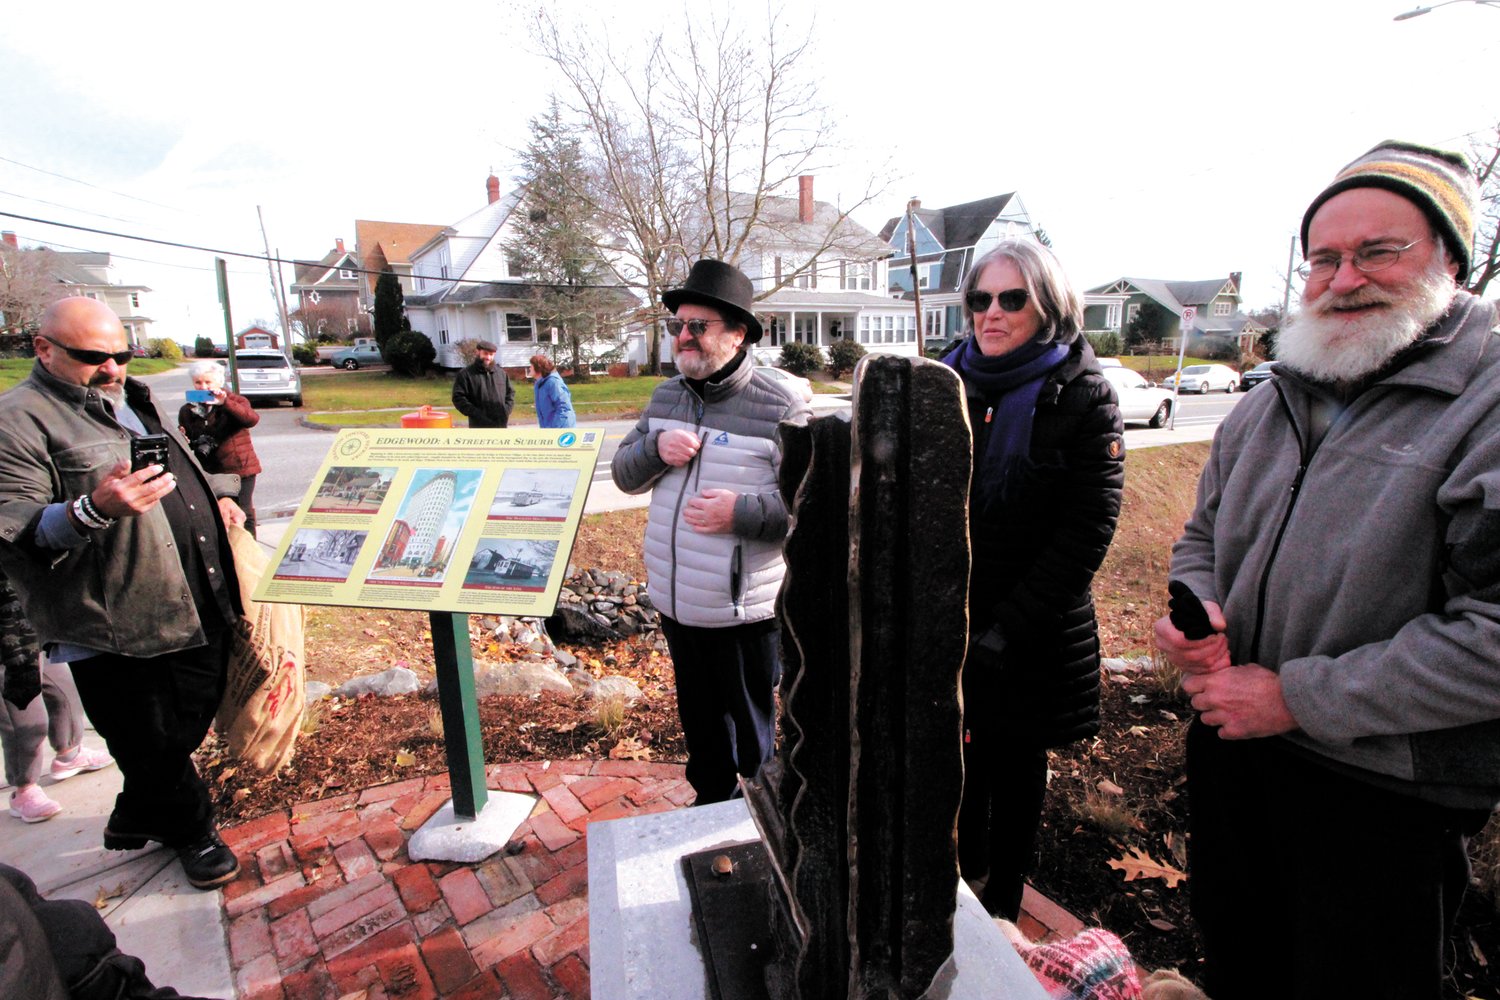 THEY ALL HAD A HAND IN IT:  Dennis Conte, Cranston City Mason;  David Goldenberg, filmmaker  who inspired the recognition of the end of the line marker; Barbara Rubine, president of the Edgewood Waterfront Preservation Association and artist David Karoff gather following the unveiling of the sculpture Sunday. (Cranston Herald photos)